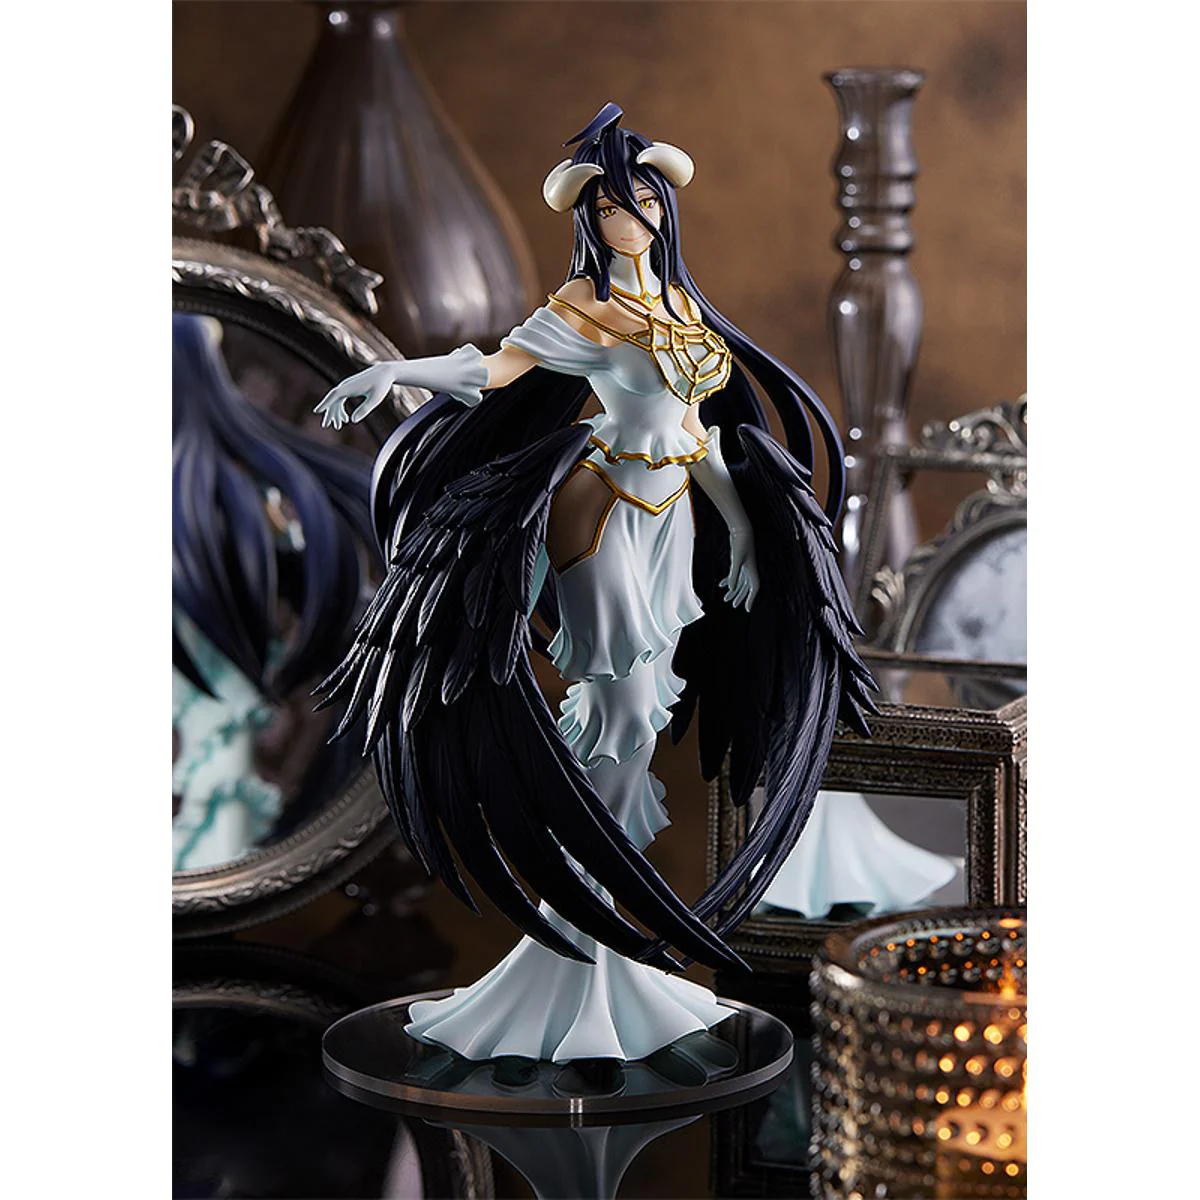 GSC POP UP PARADE OverLord IV Albedo Figure (Japan Ver.)